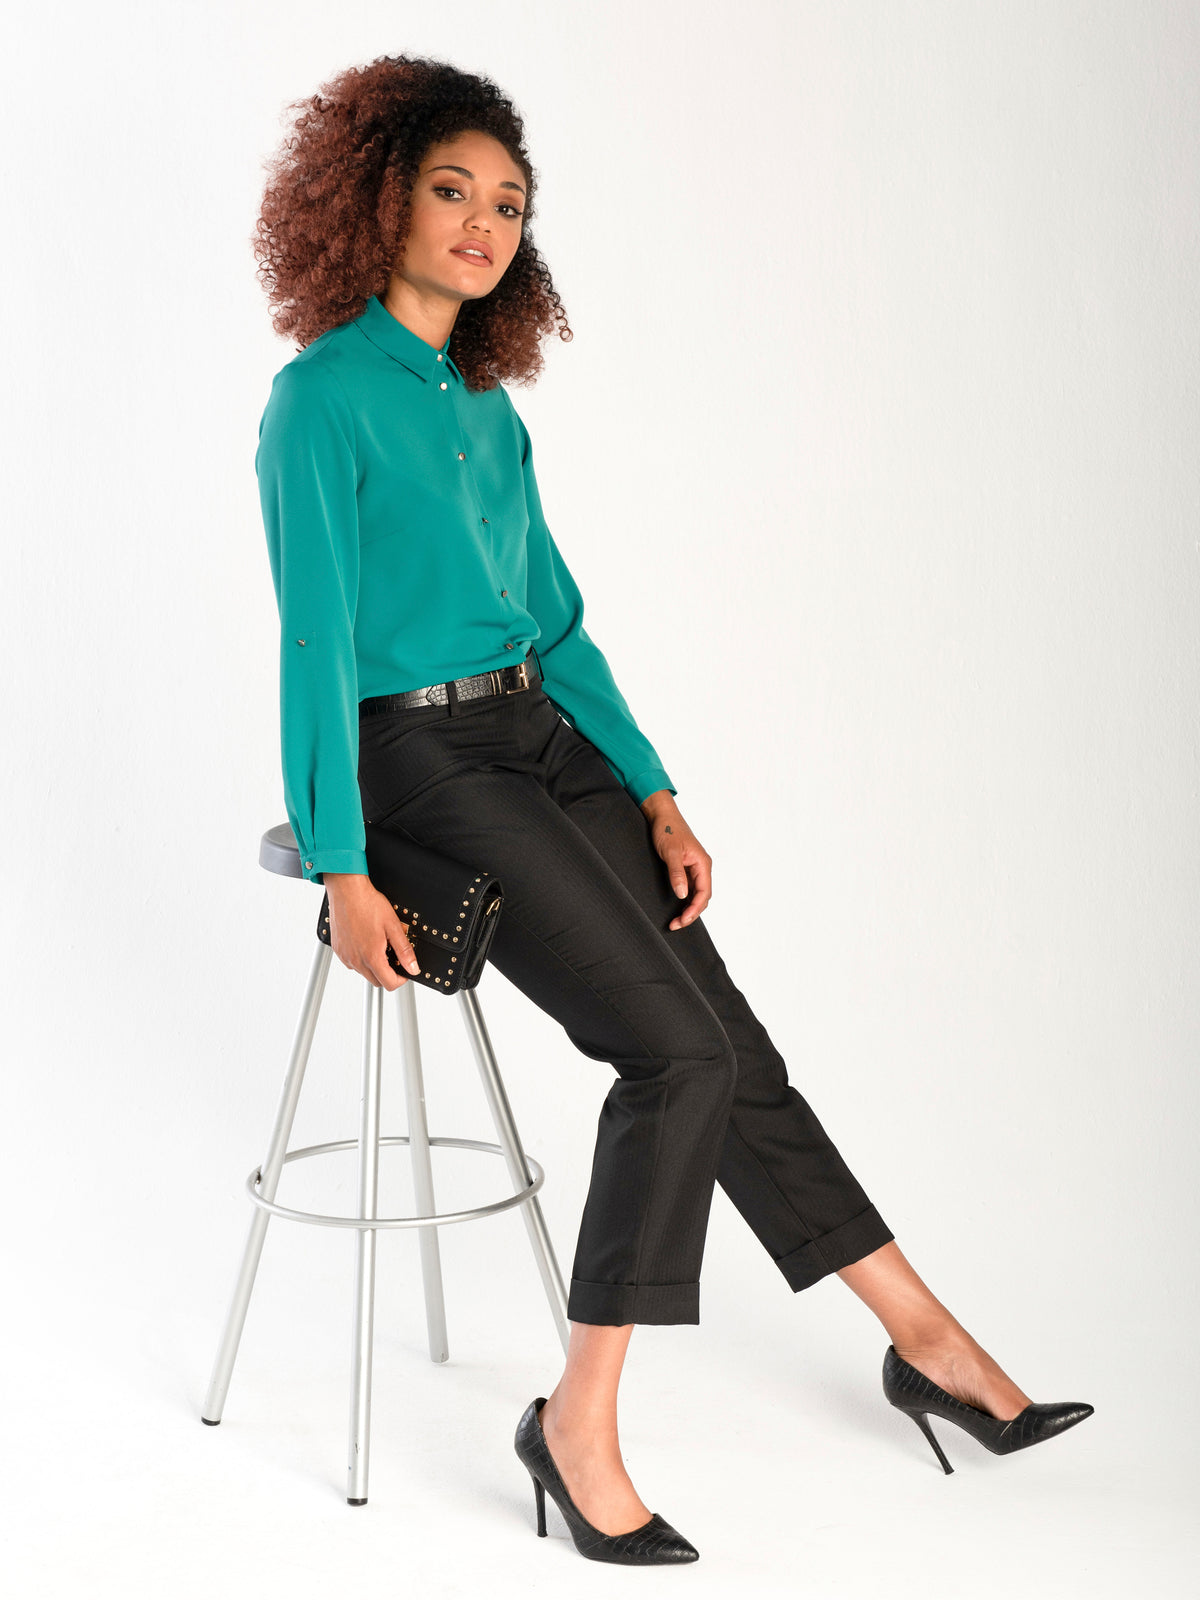 Cathy classic buttoned shirt - green